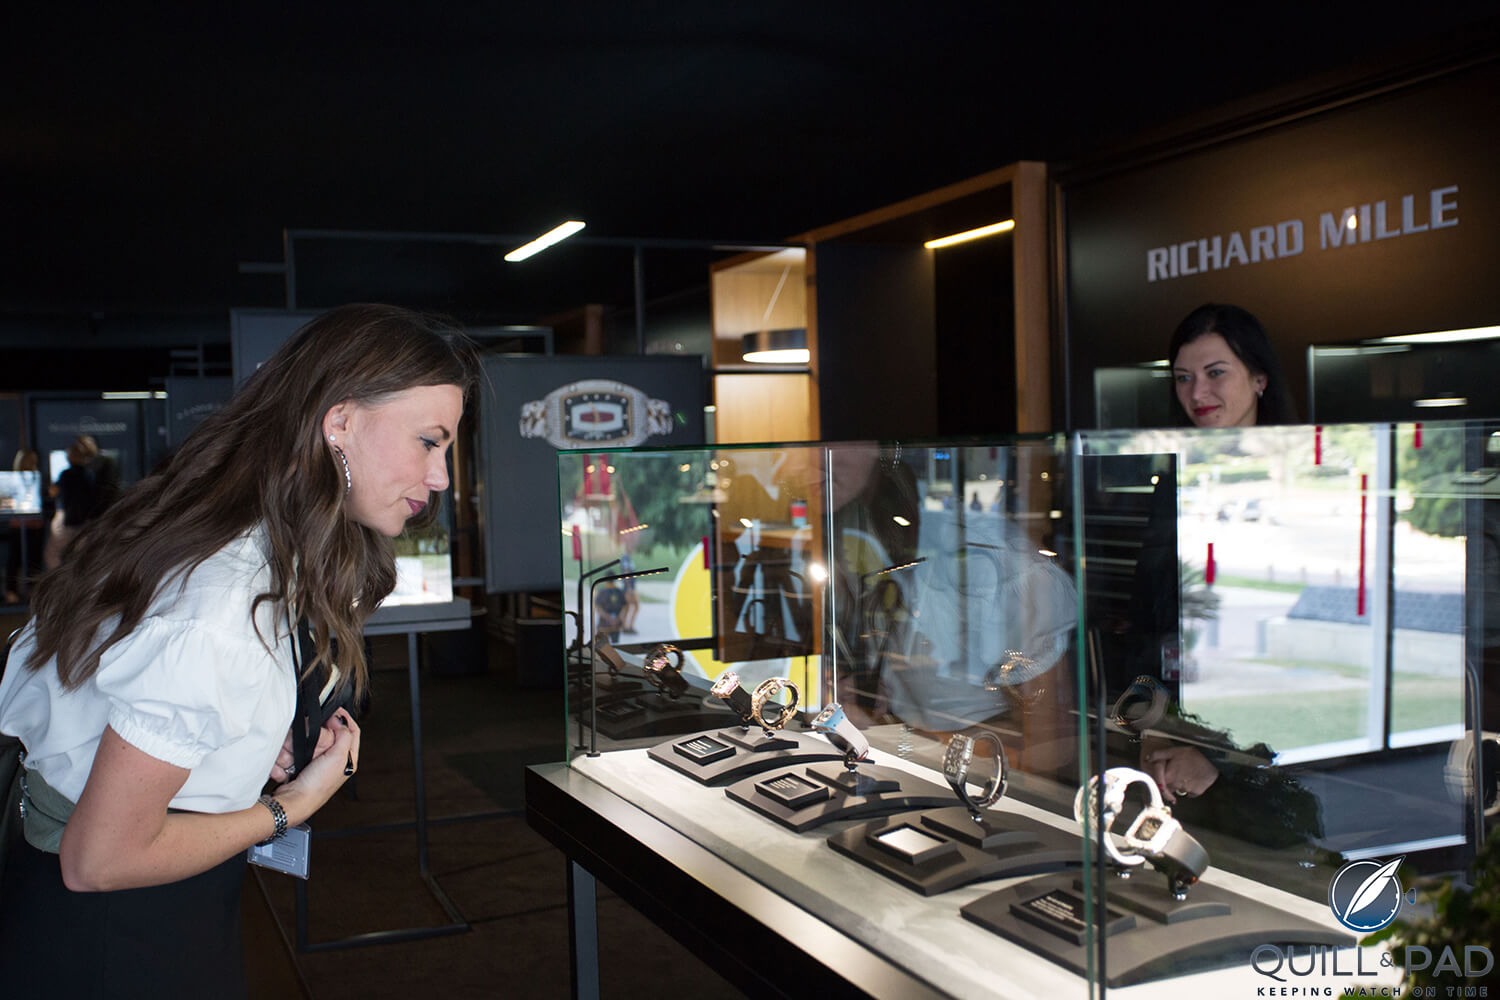 50% of the Richard Mille stand at Dubai Watch Week was devoted to ladies watches, a fact that didn't go unnoticed by this sharp eyed visitor